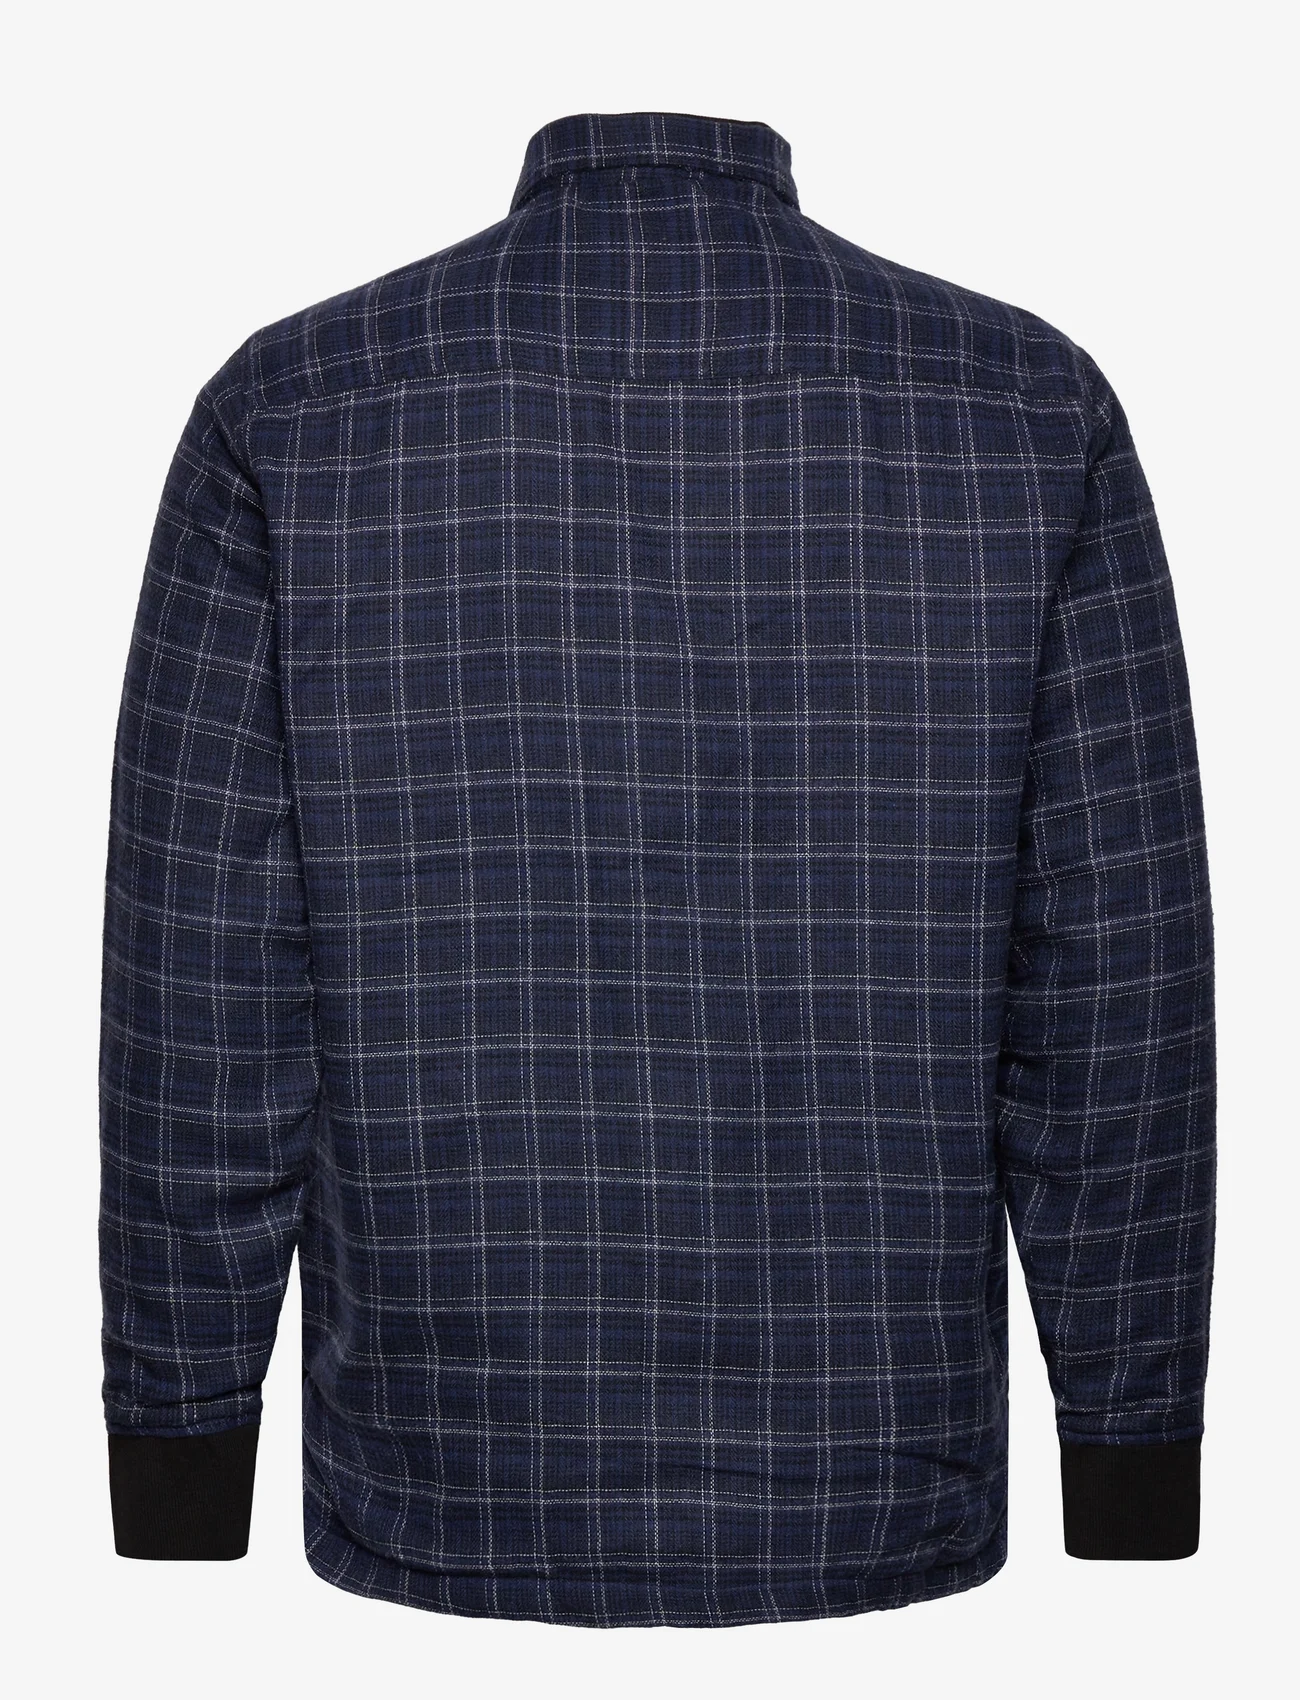 Kronstadt - Ramon Flannel check 07 quilted overshirt - vyrams - navy - 1